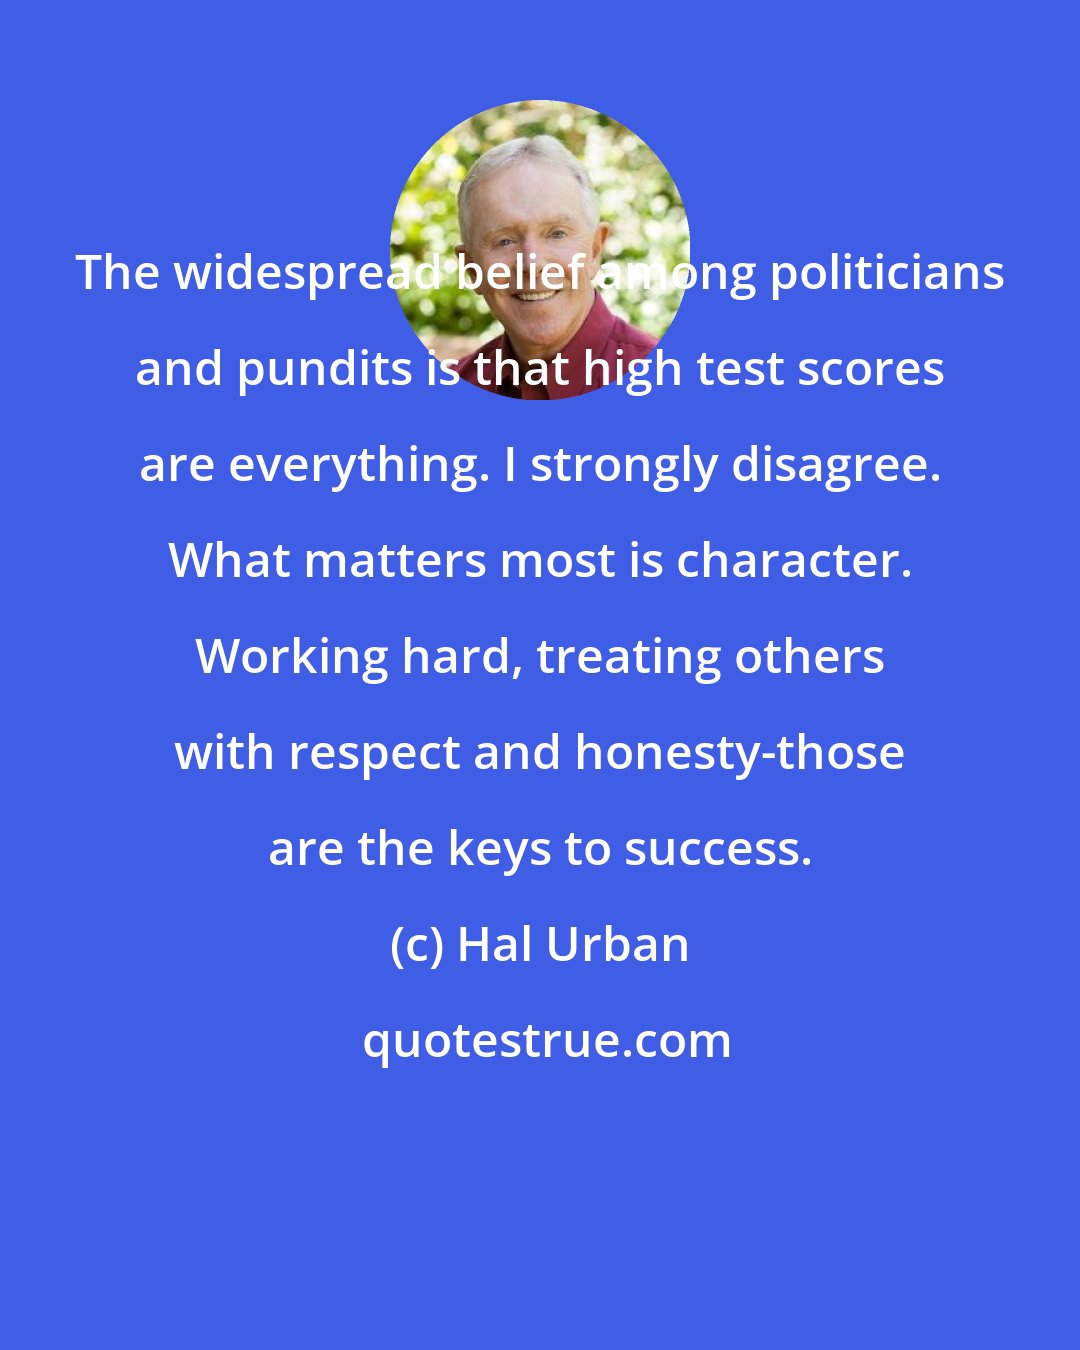 Hal Urban: The widespread belief among politicians and pundits is that high test scores are everything. I strongly disagree. What matters most is character. Working hard, treating others with respect and honesty-those are the keys to success.